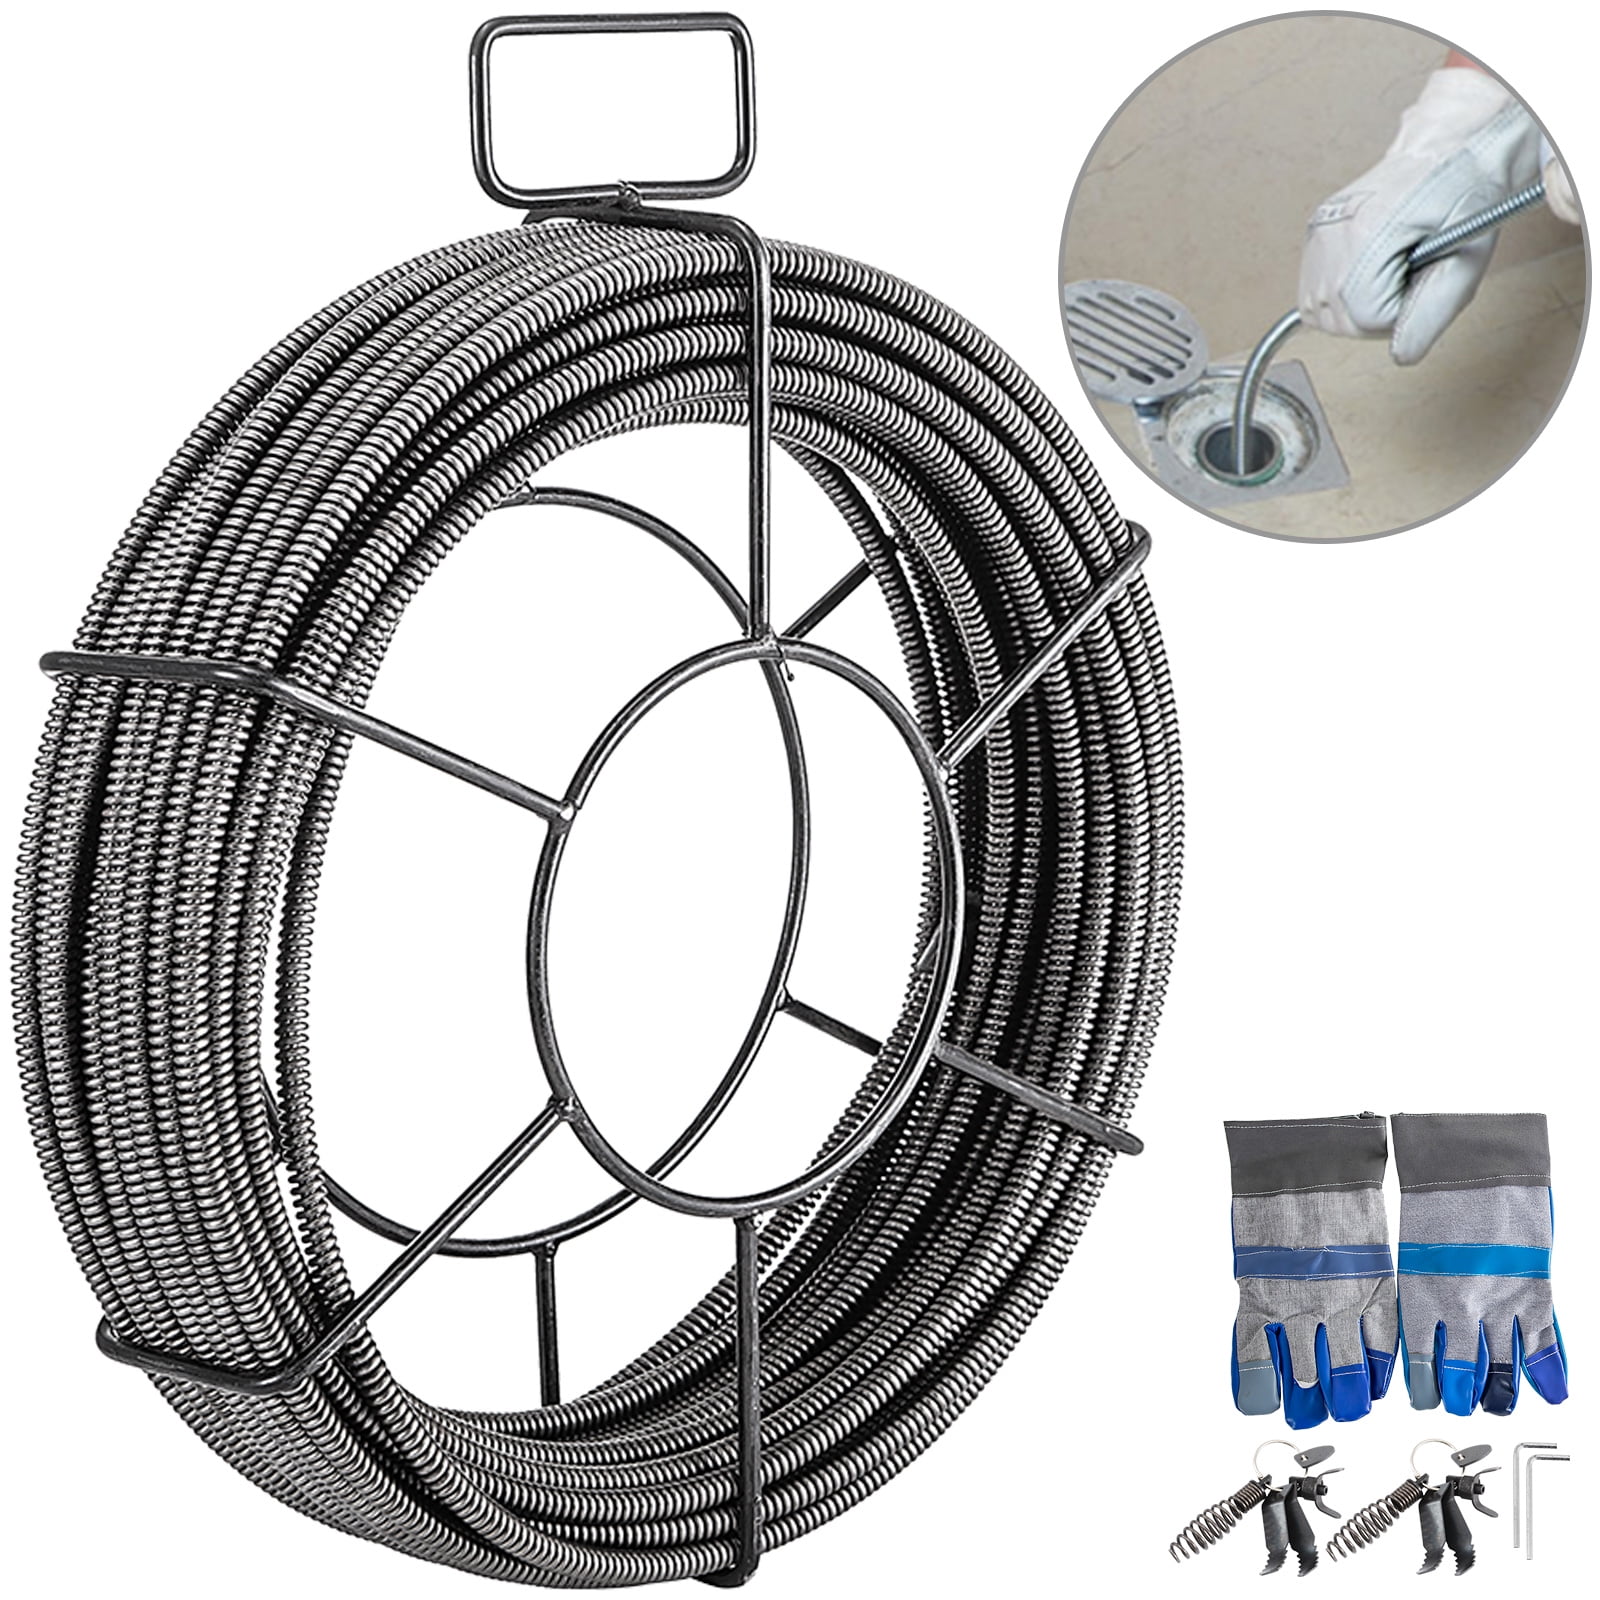 Cobra Drum Auger Drain Snakes w/ 1/4 x 15' Cable With Open Hook. 